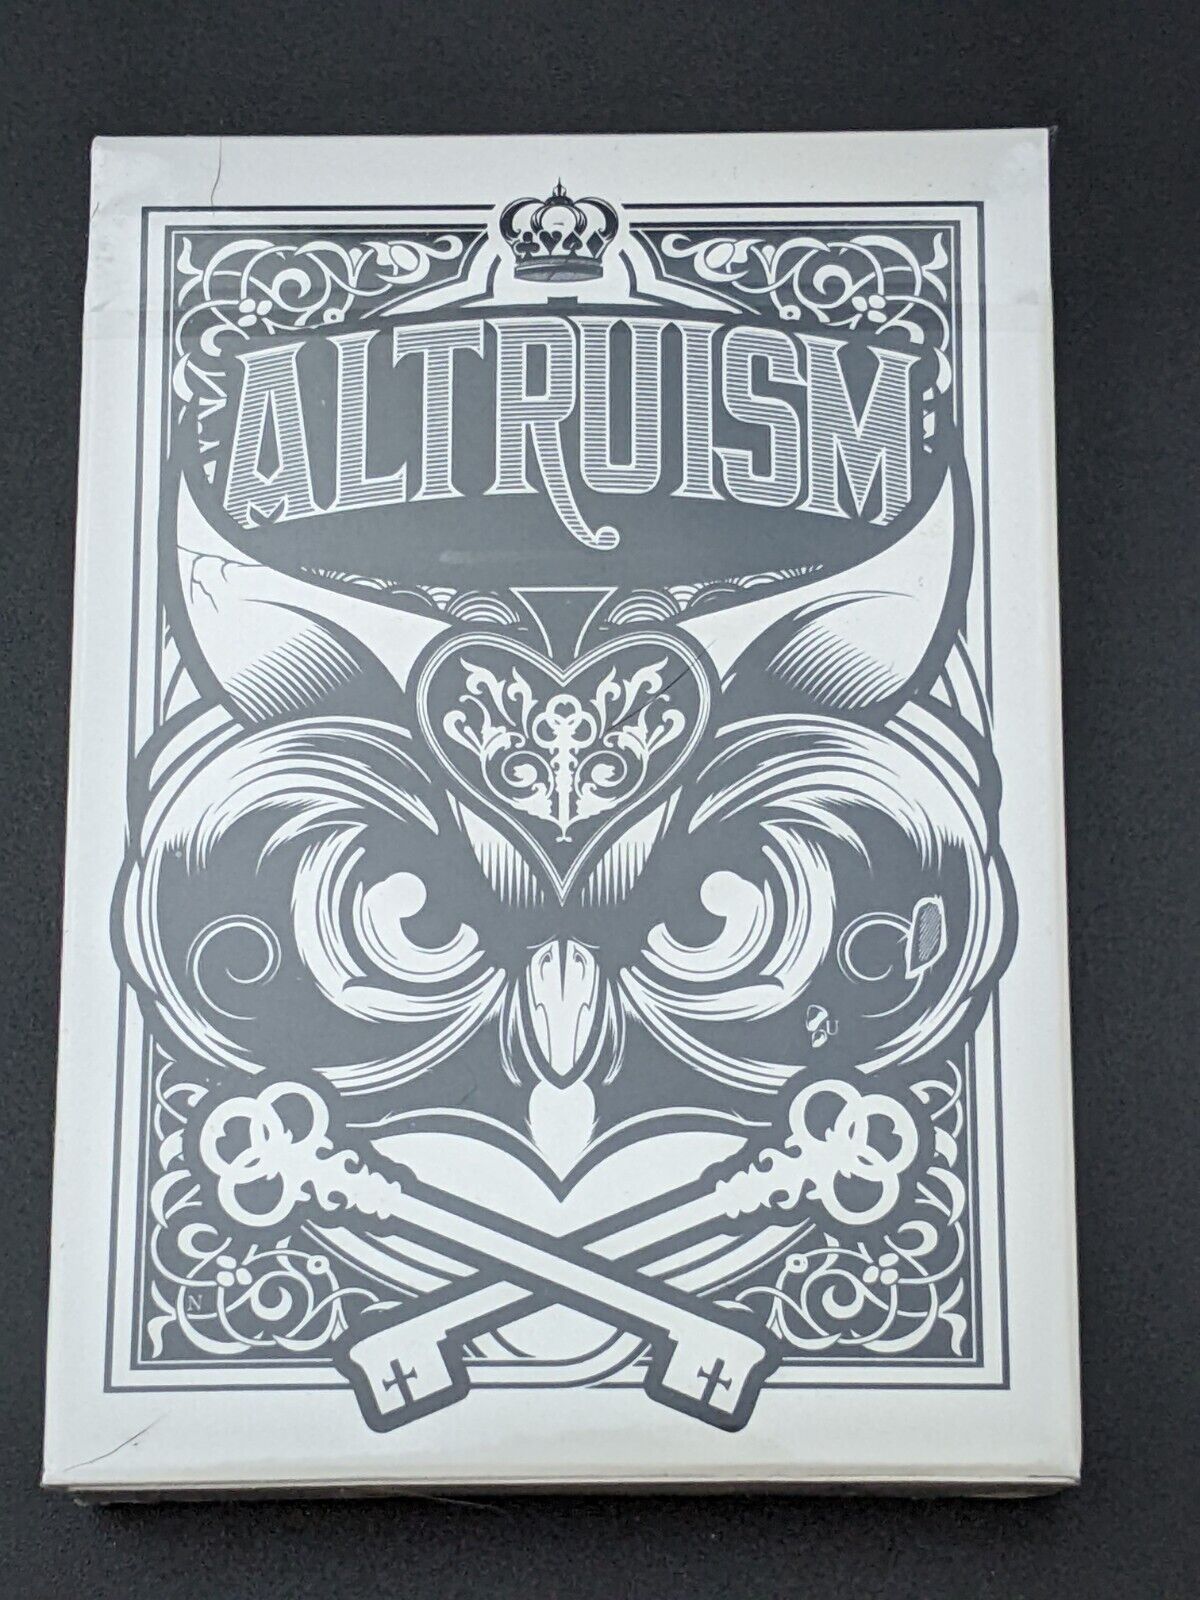 Altruism Snow Owl  Playing cards  - New Sealed